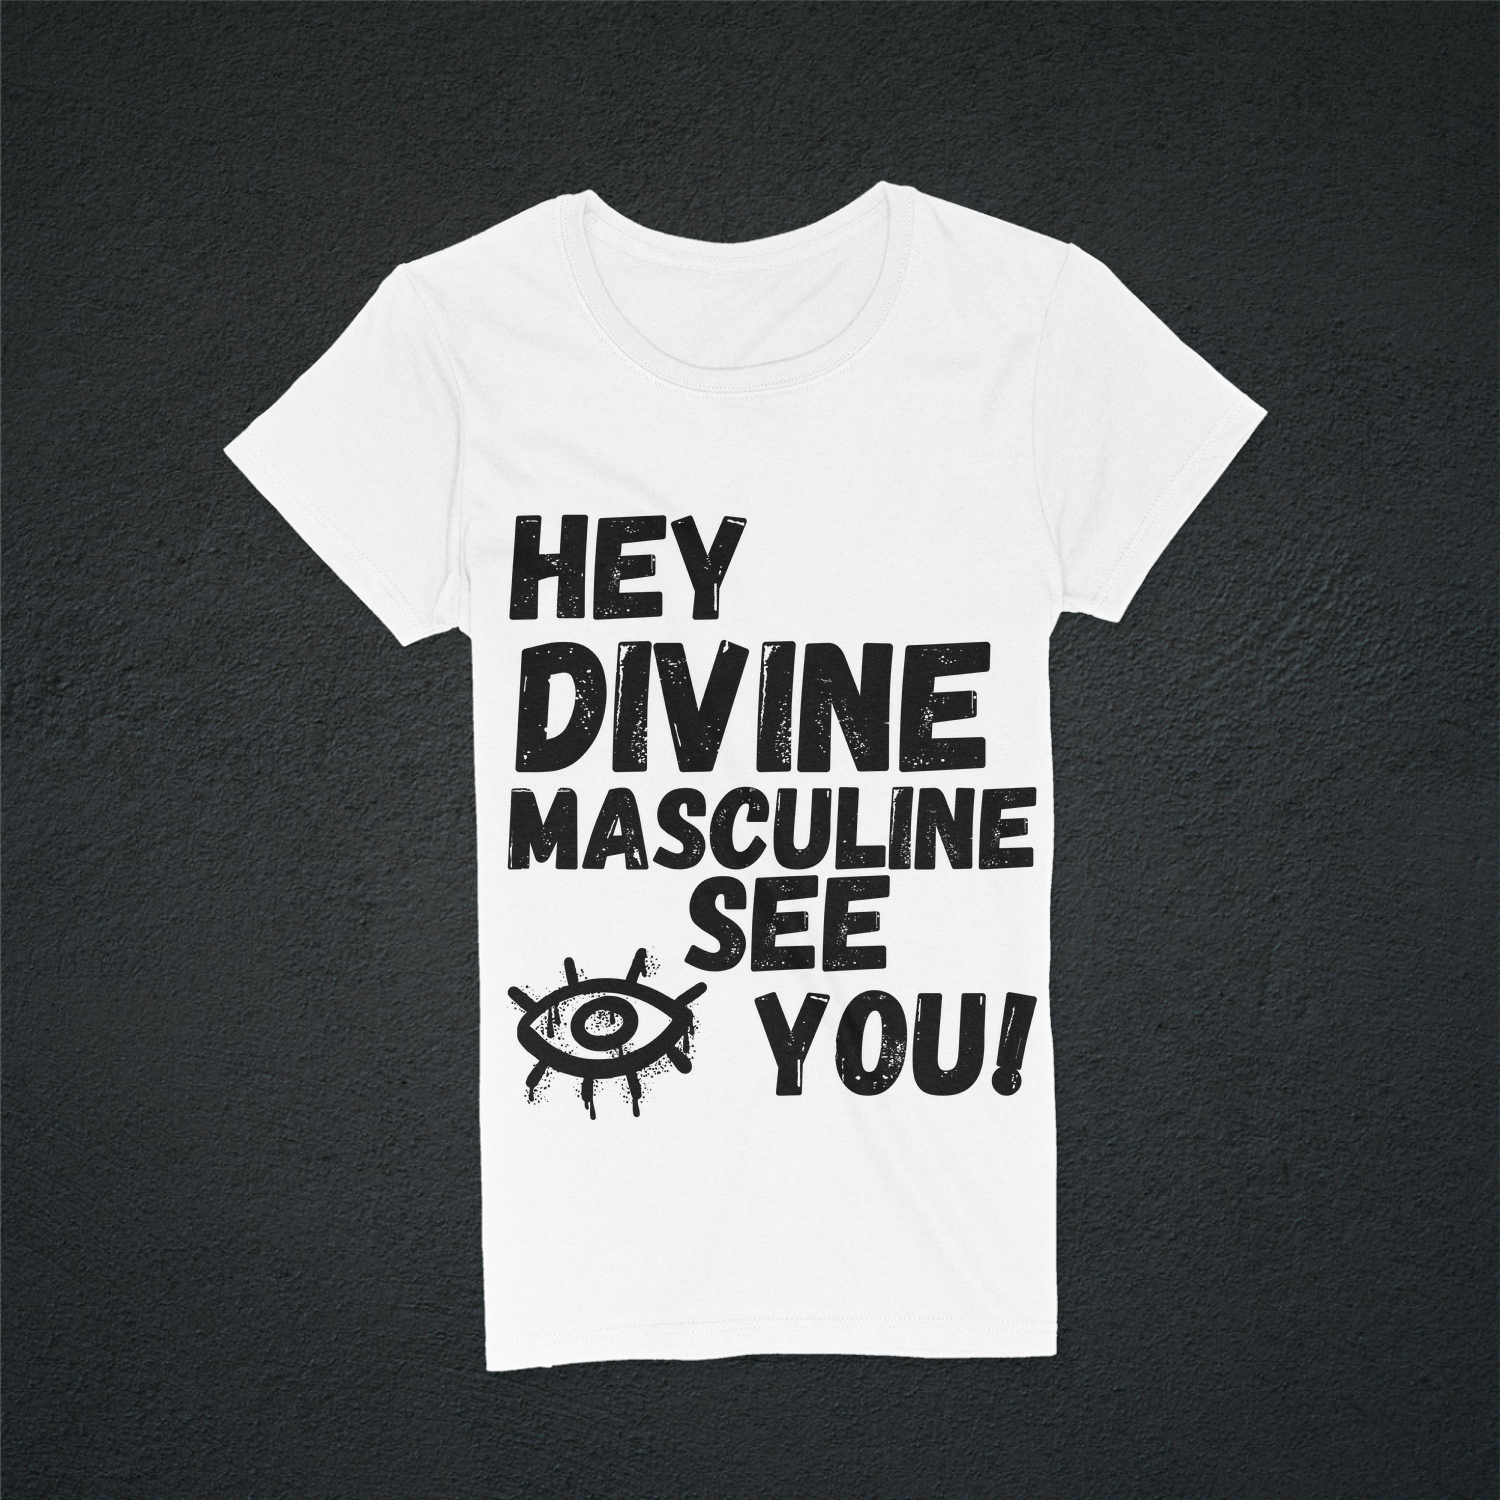 White colored women t-shirt with the text " HEY DIVINE MASCULINE I (a picture of a eye) SEE YOU! in black